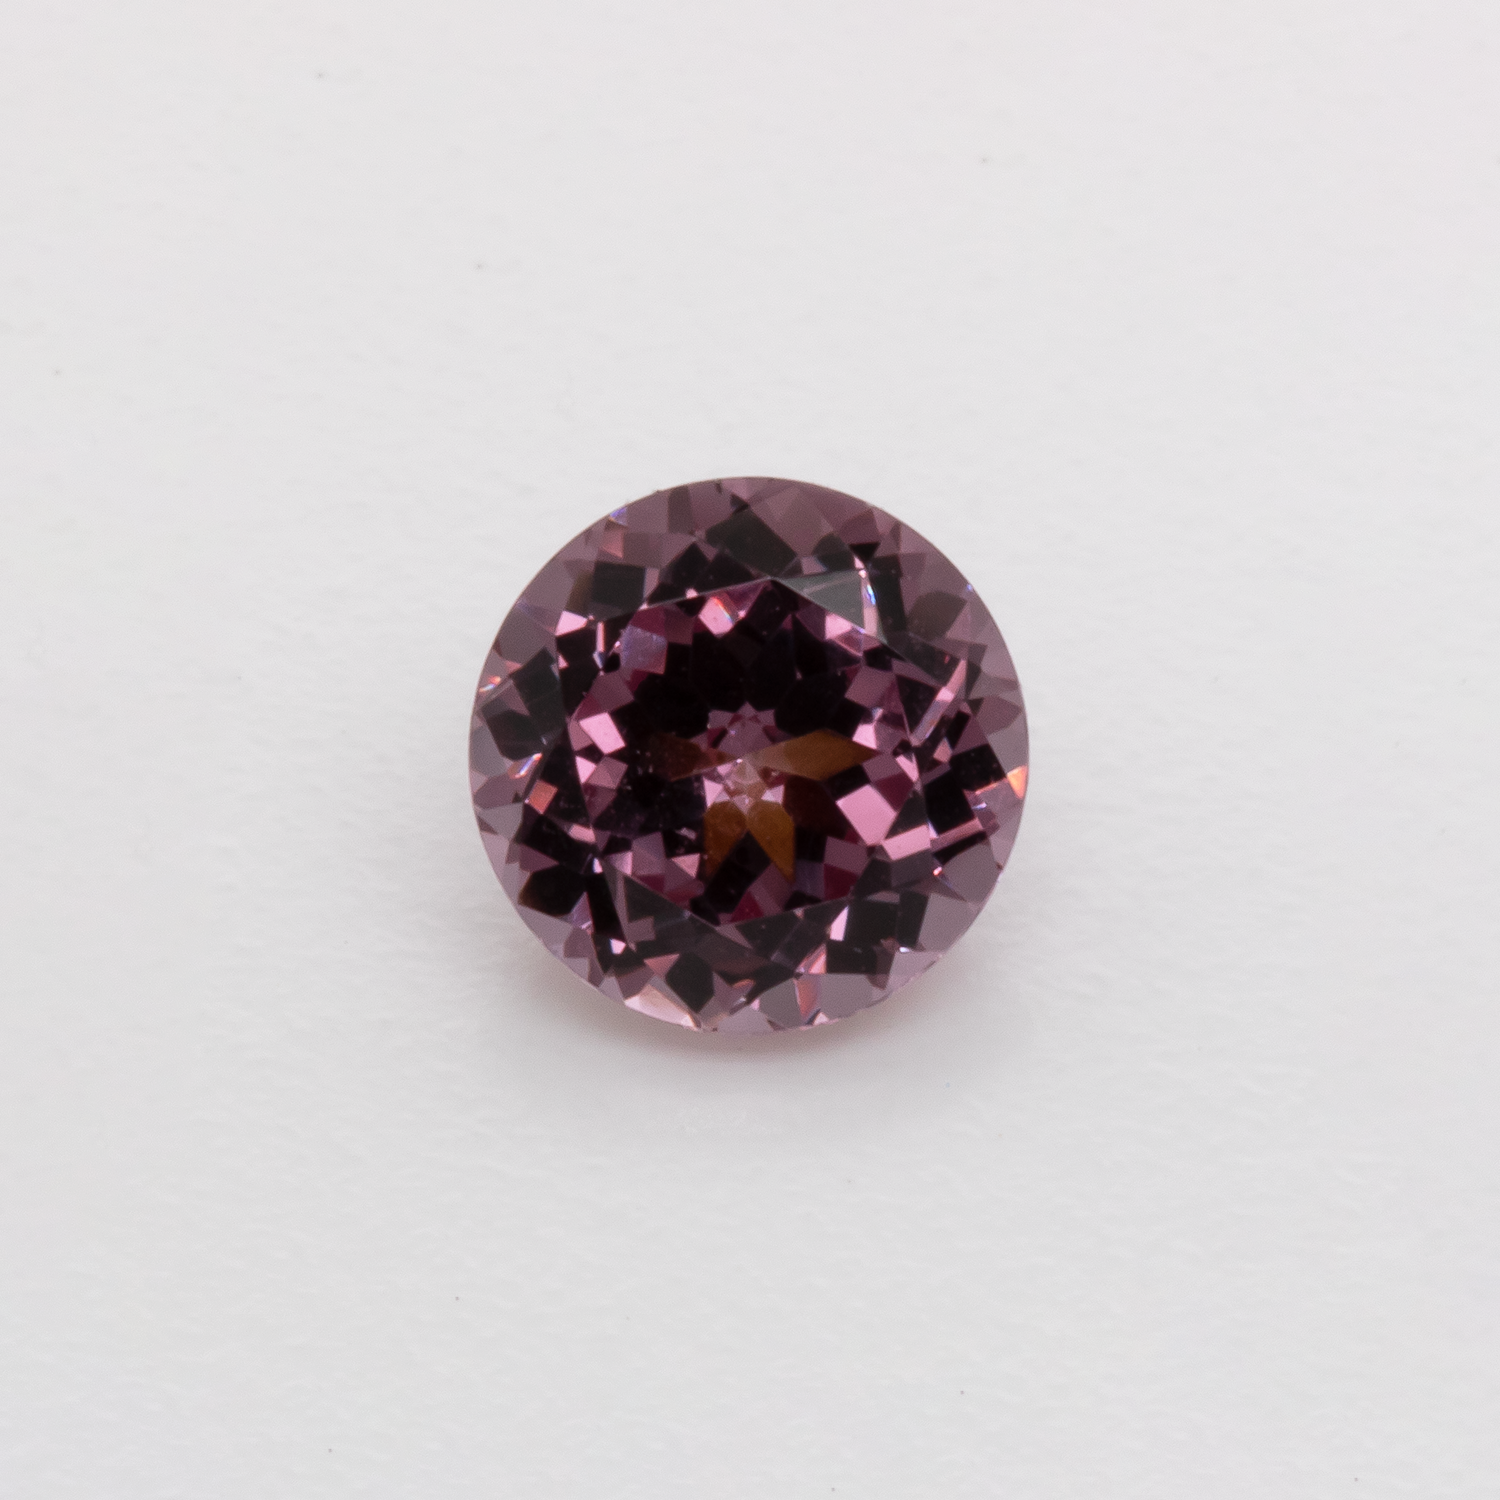 Spinell - rosa, rund, 5,1x5,1 mm, 0,64 cts, Nr. SP90019